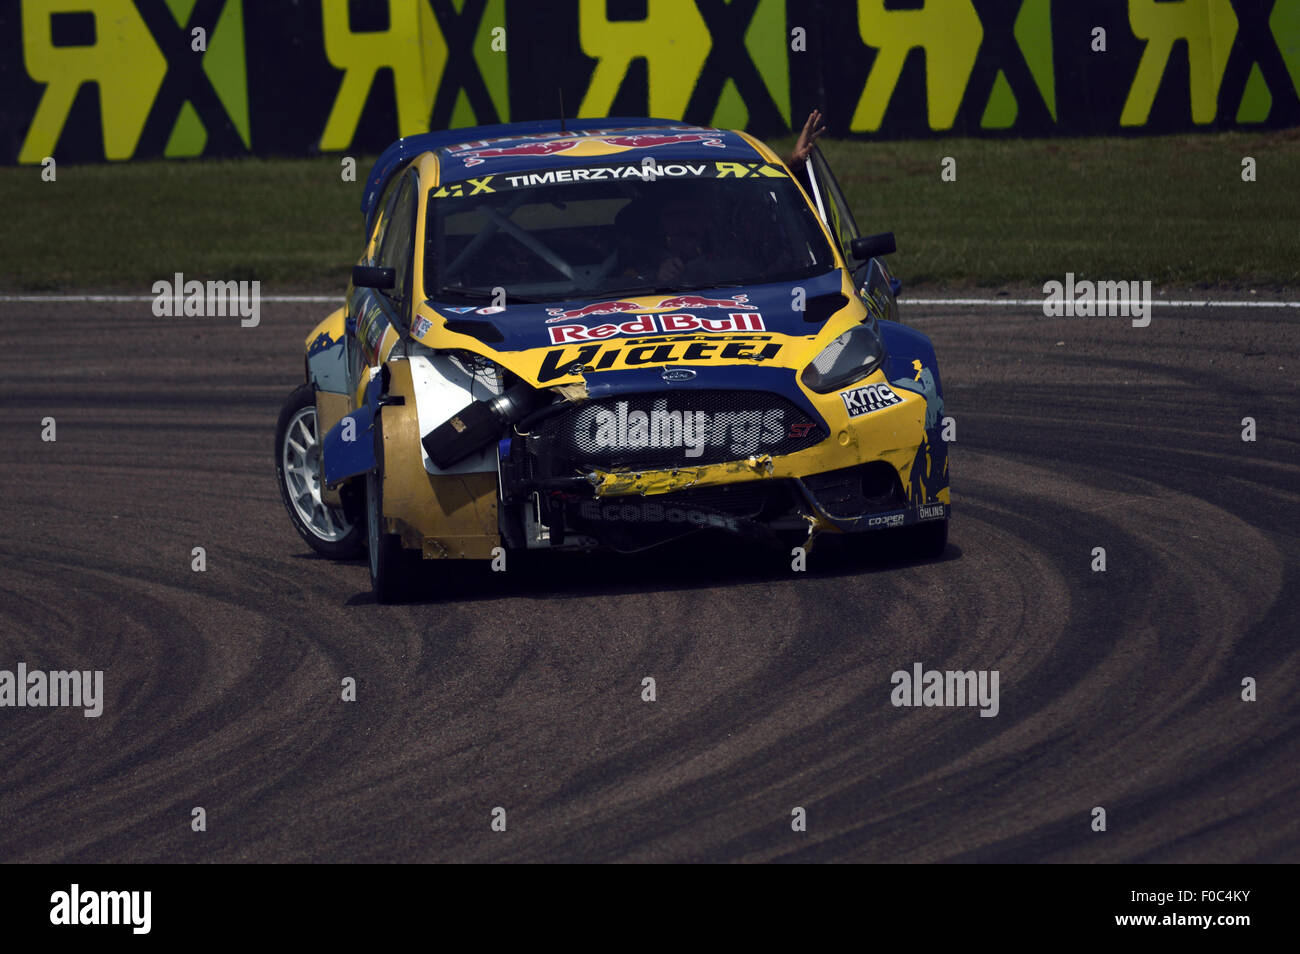 World rallycross championship 2015, at Lydden Hill racetrack in the United Kingdom, Redbull racing Ford Fiesta ST with damaged r Stock Photo